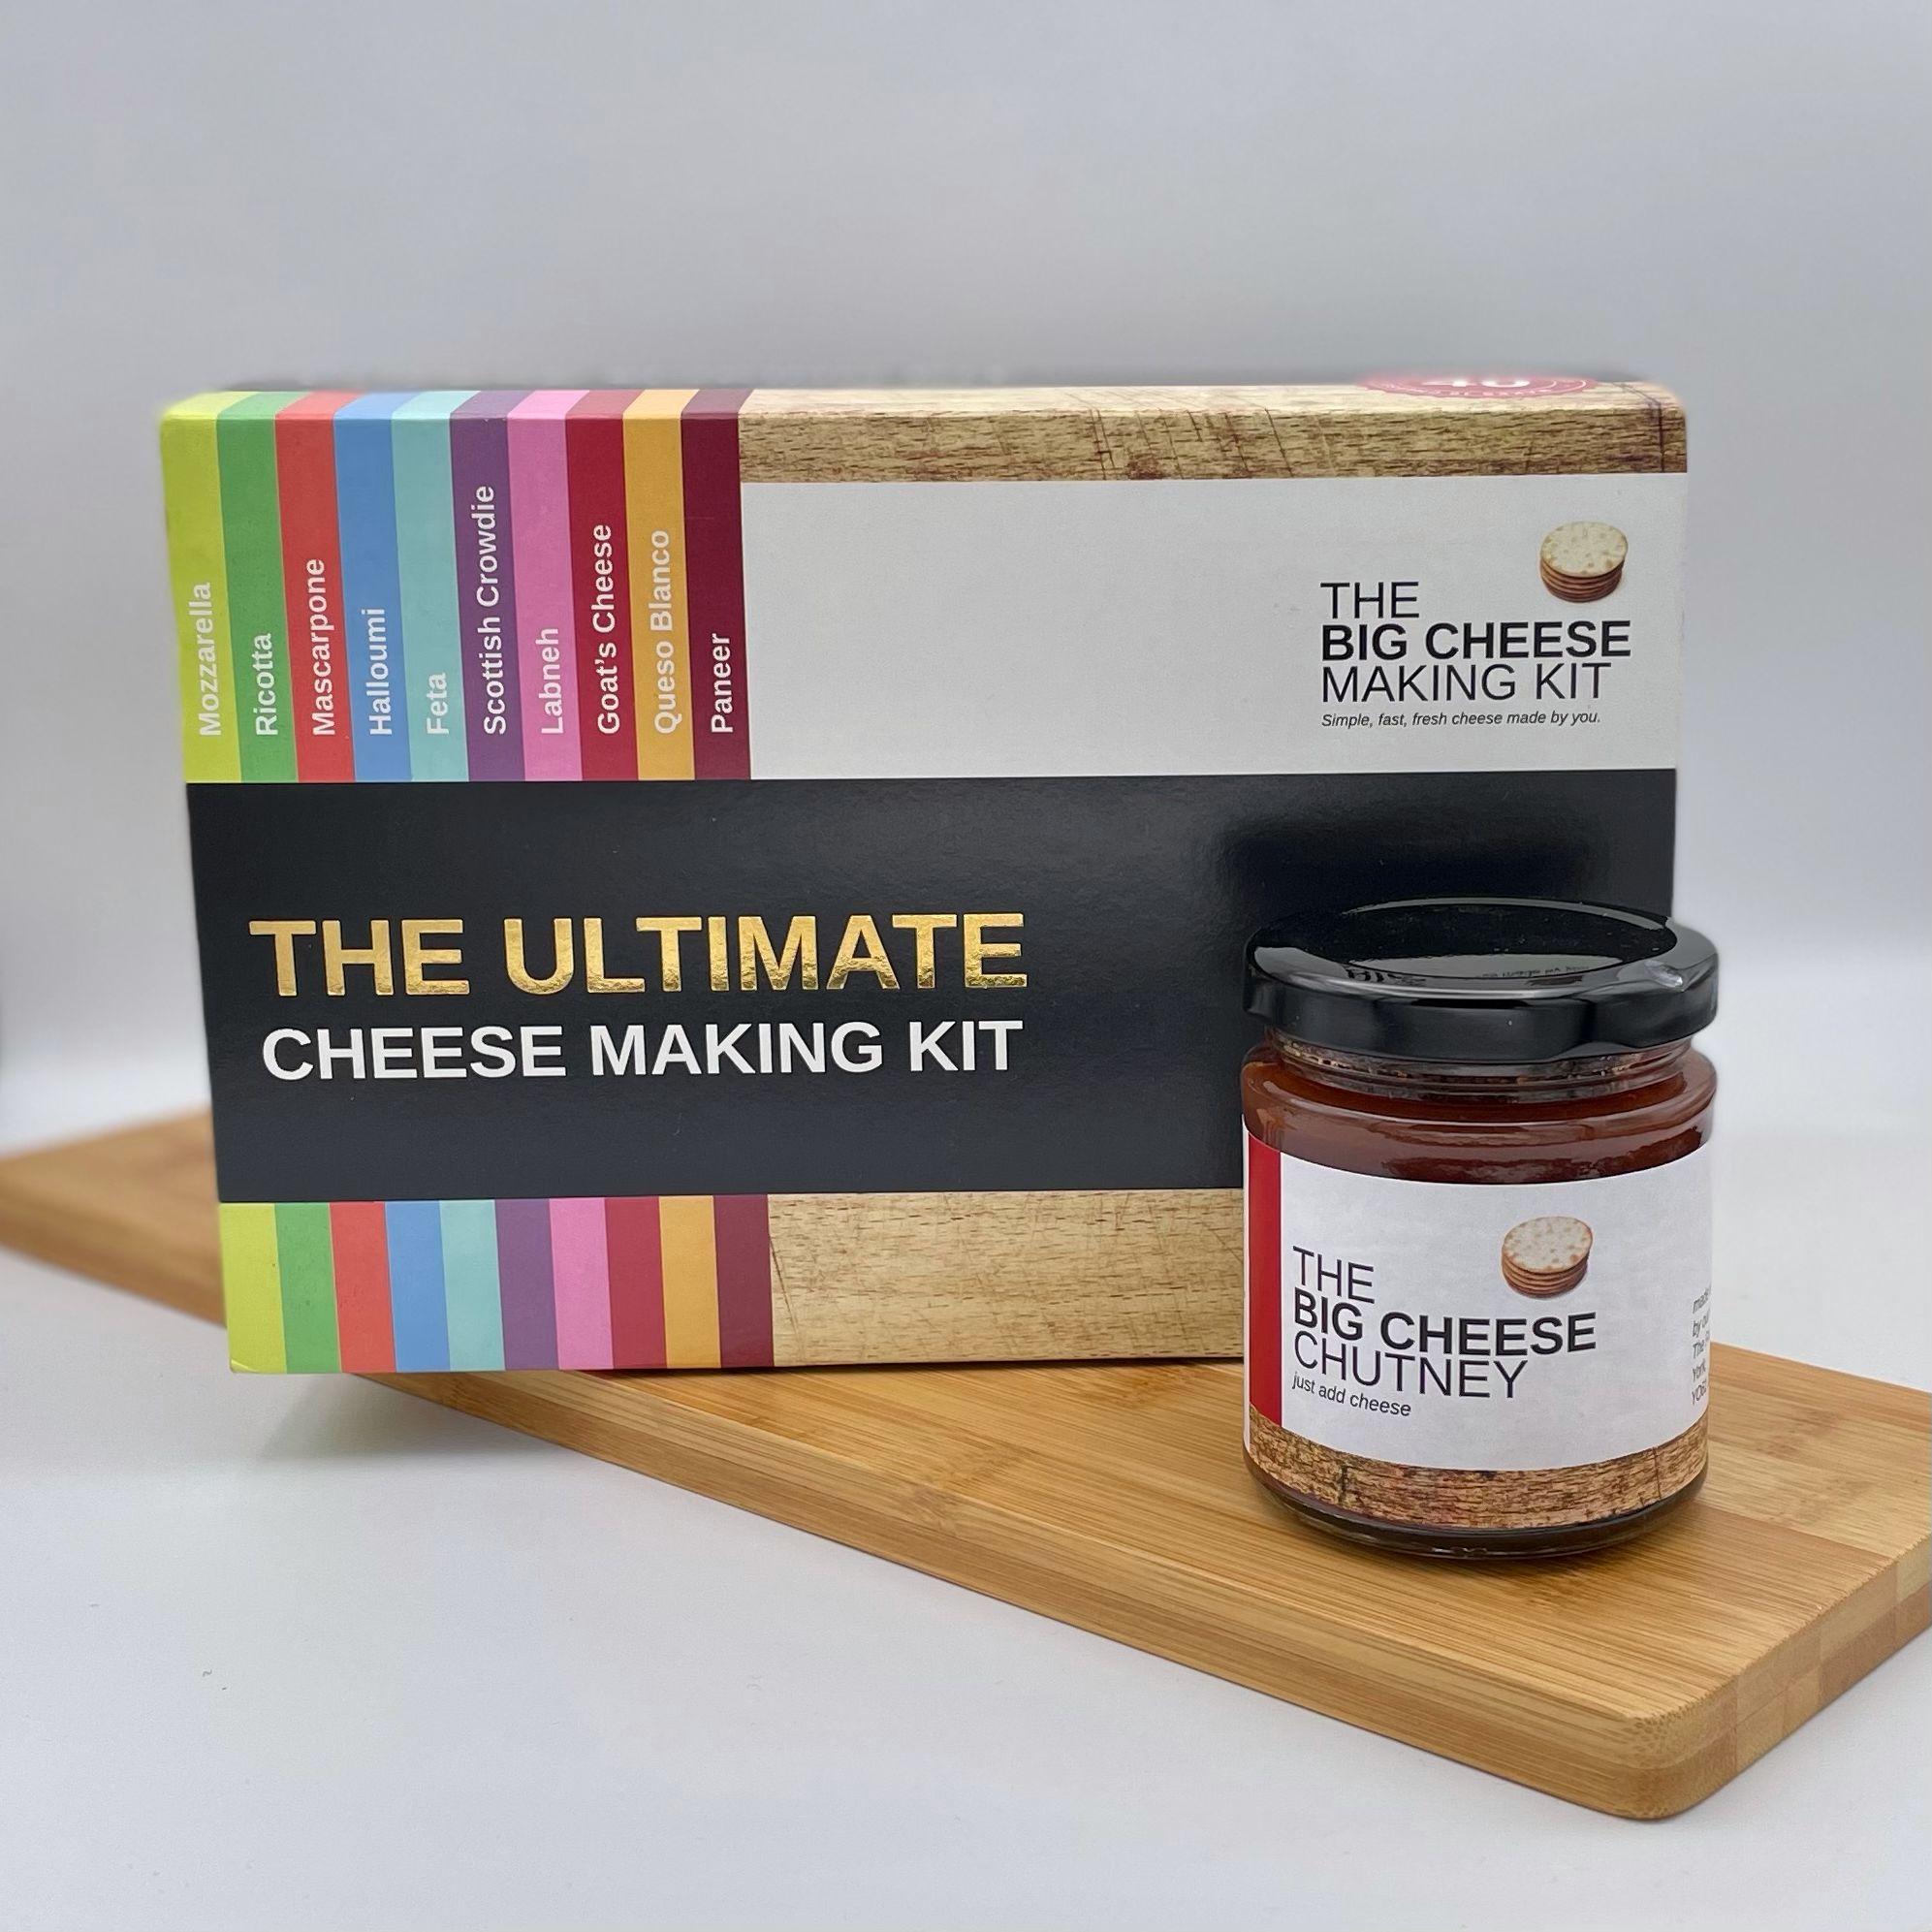 The Ultimate Cheese Making Kit Gift Set